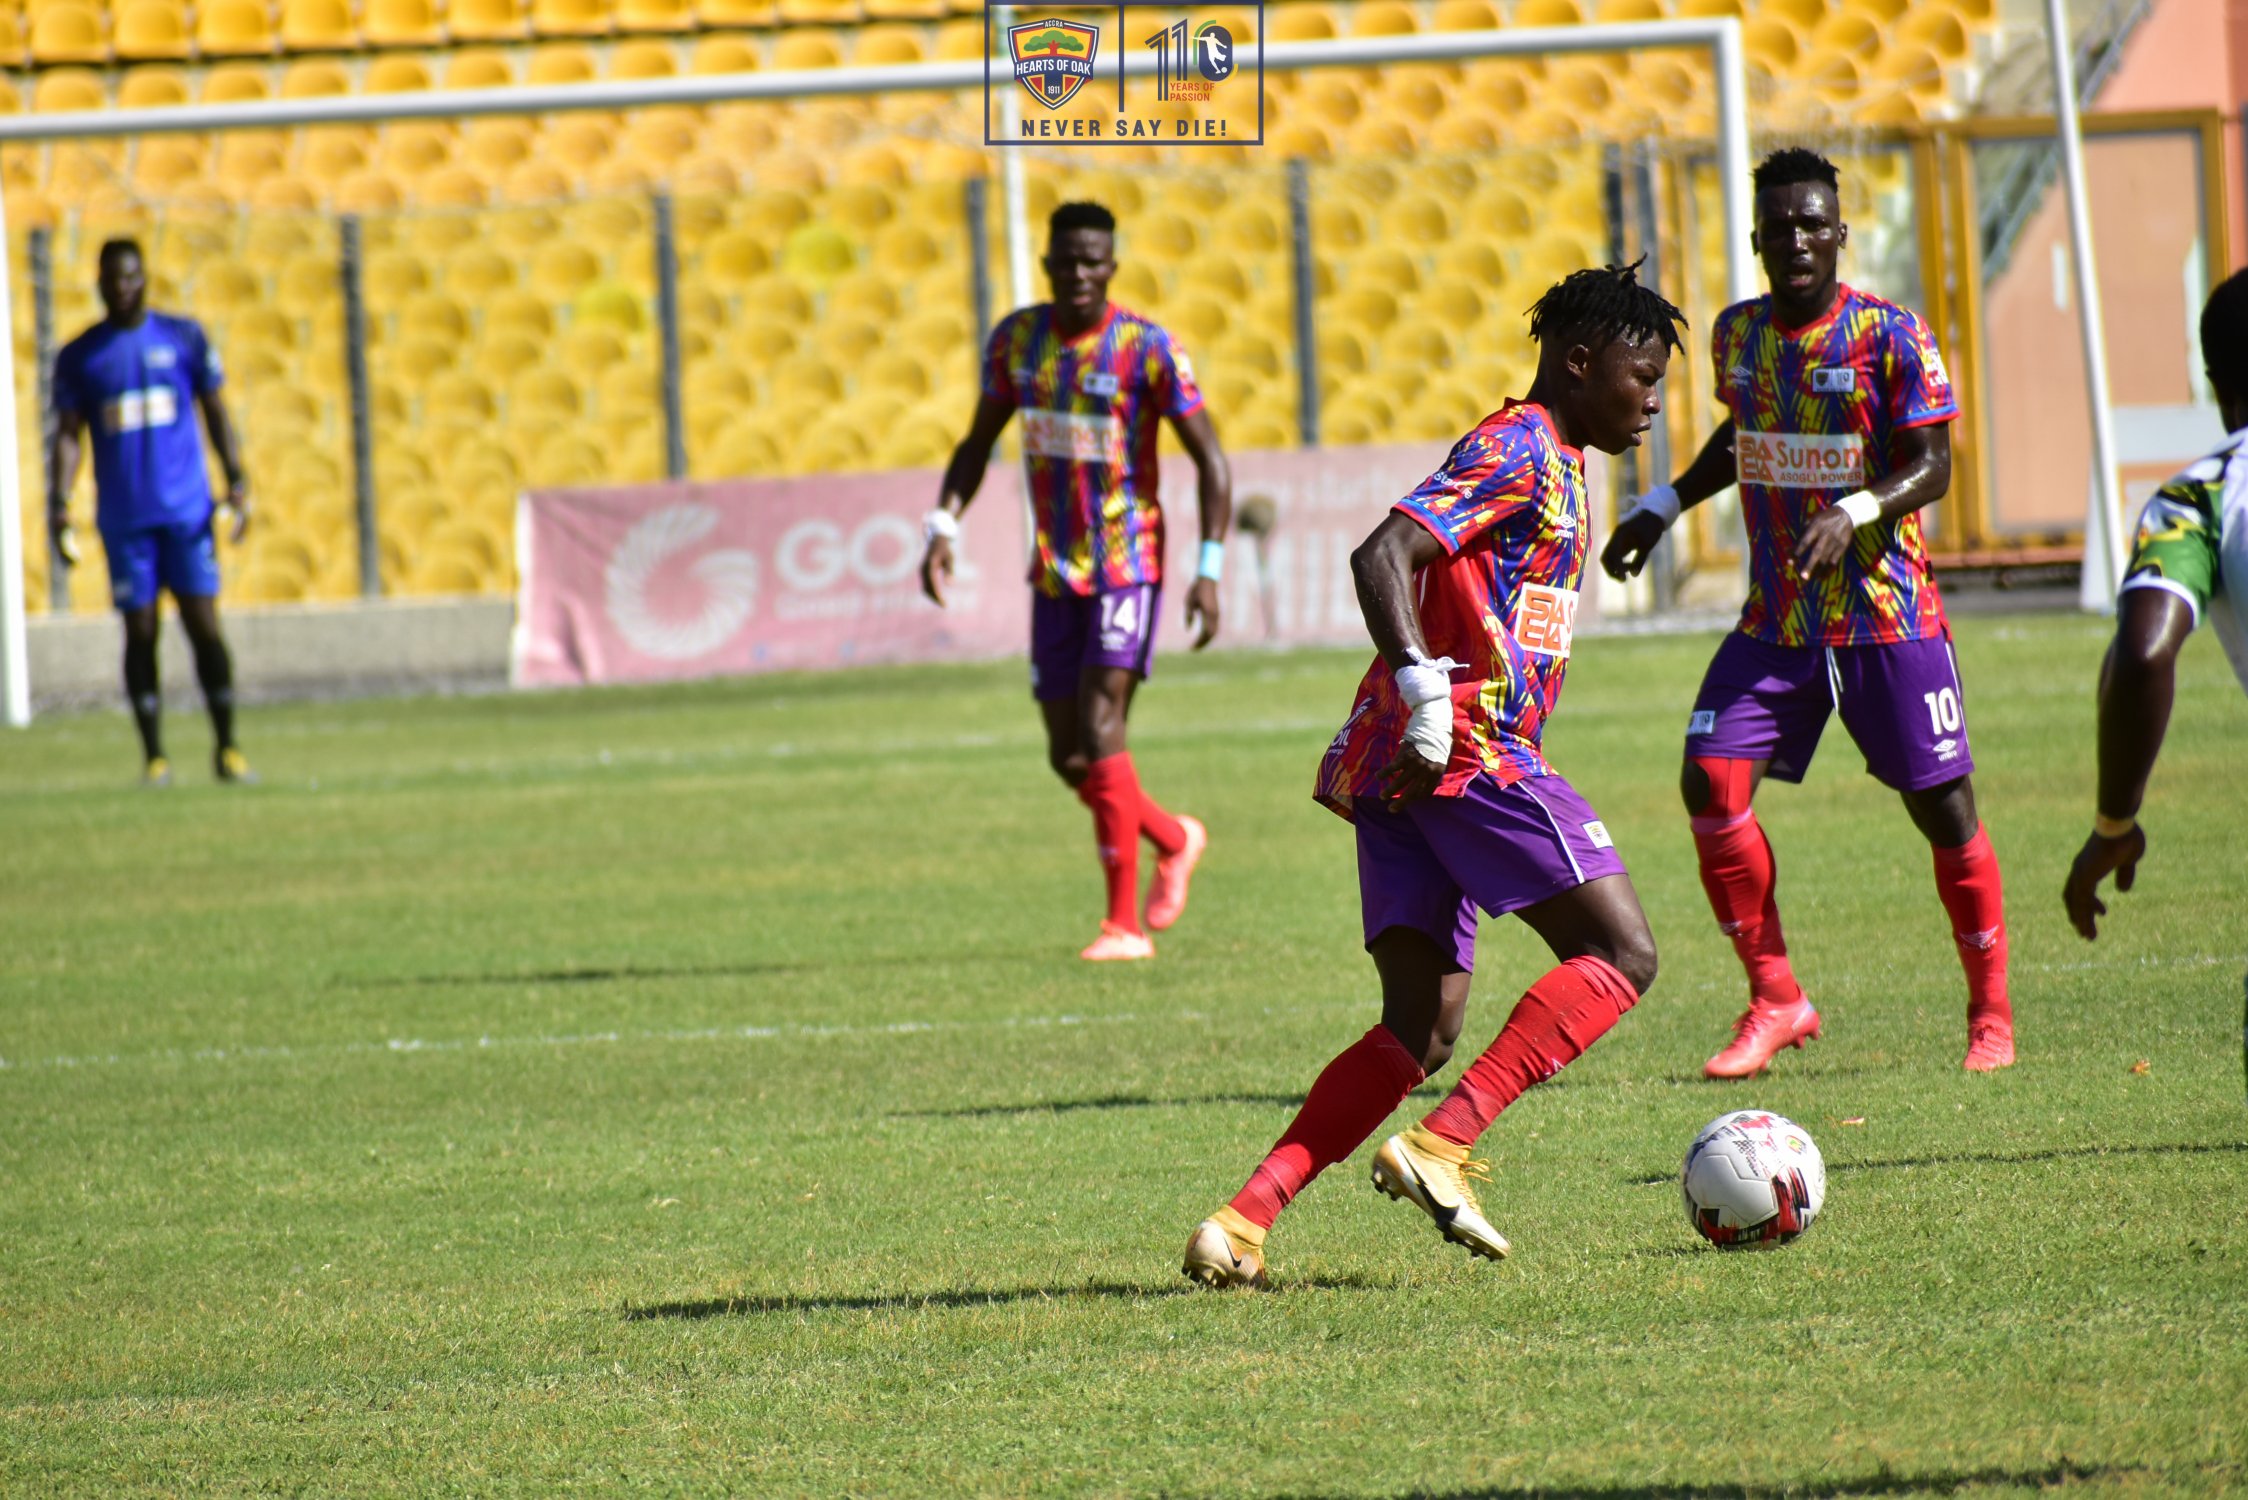 Lessons have been learnt from Wydad Casablanca’s defeat - Hearts of Oak star Salifu Ibrahim